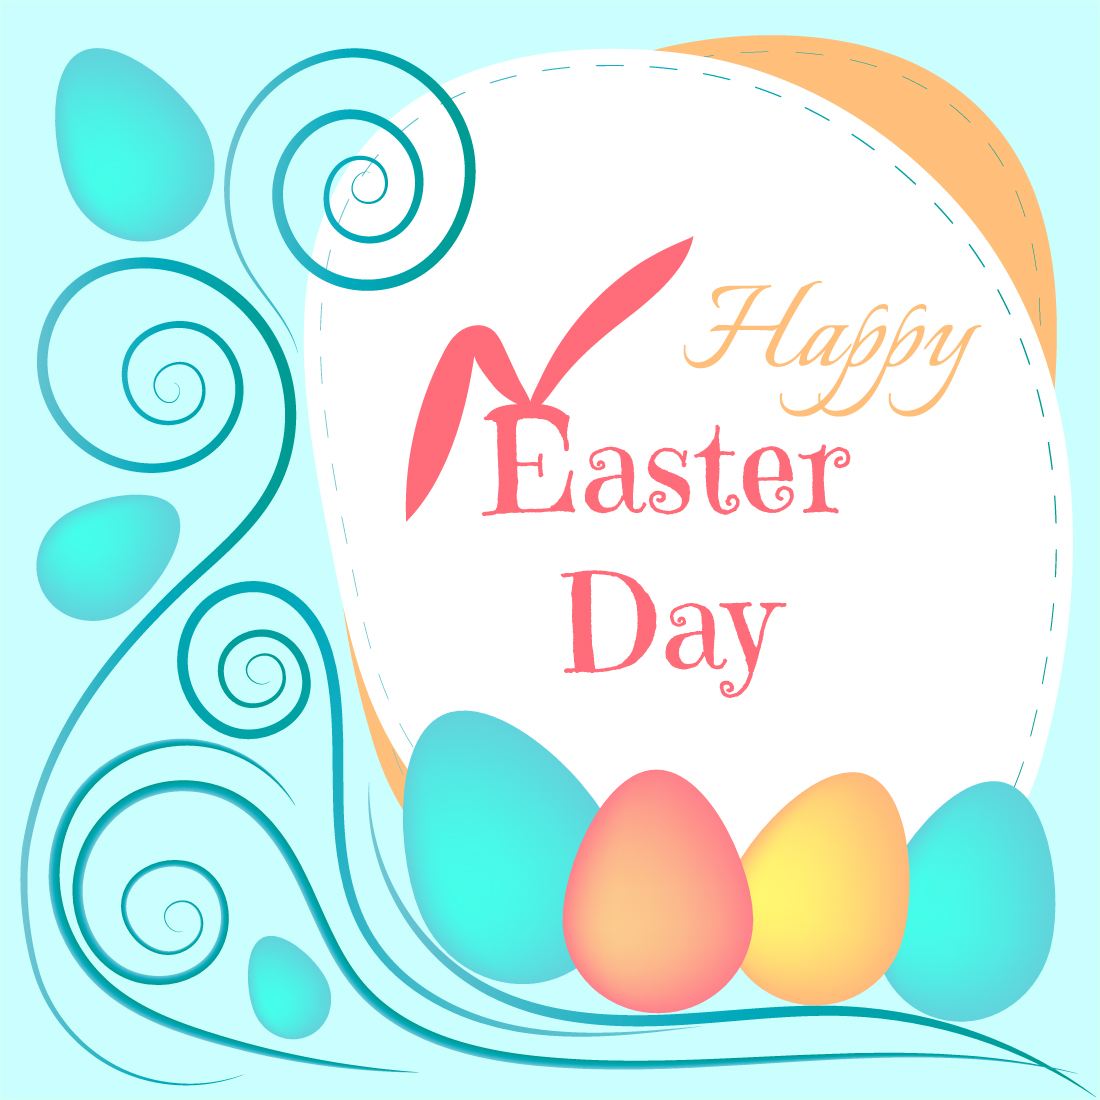 Happy Easter day card Blue card with easter eggs cover image.